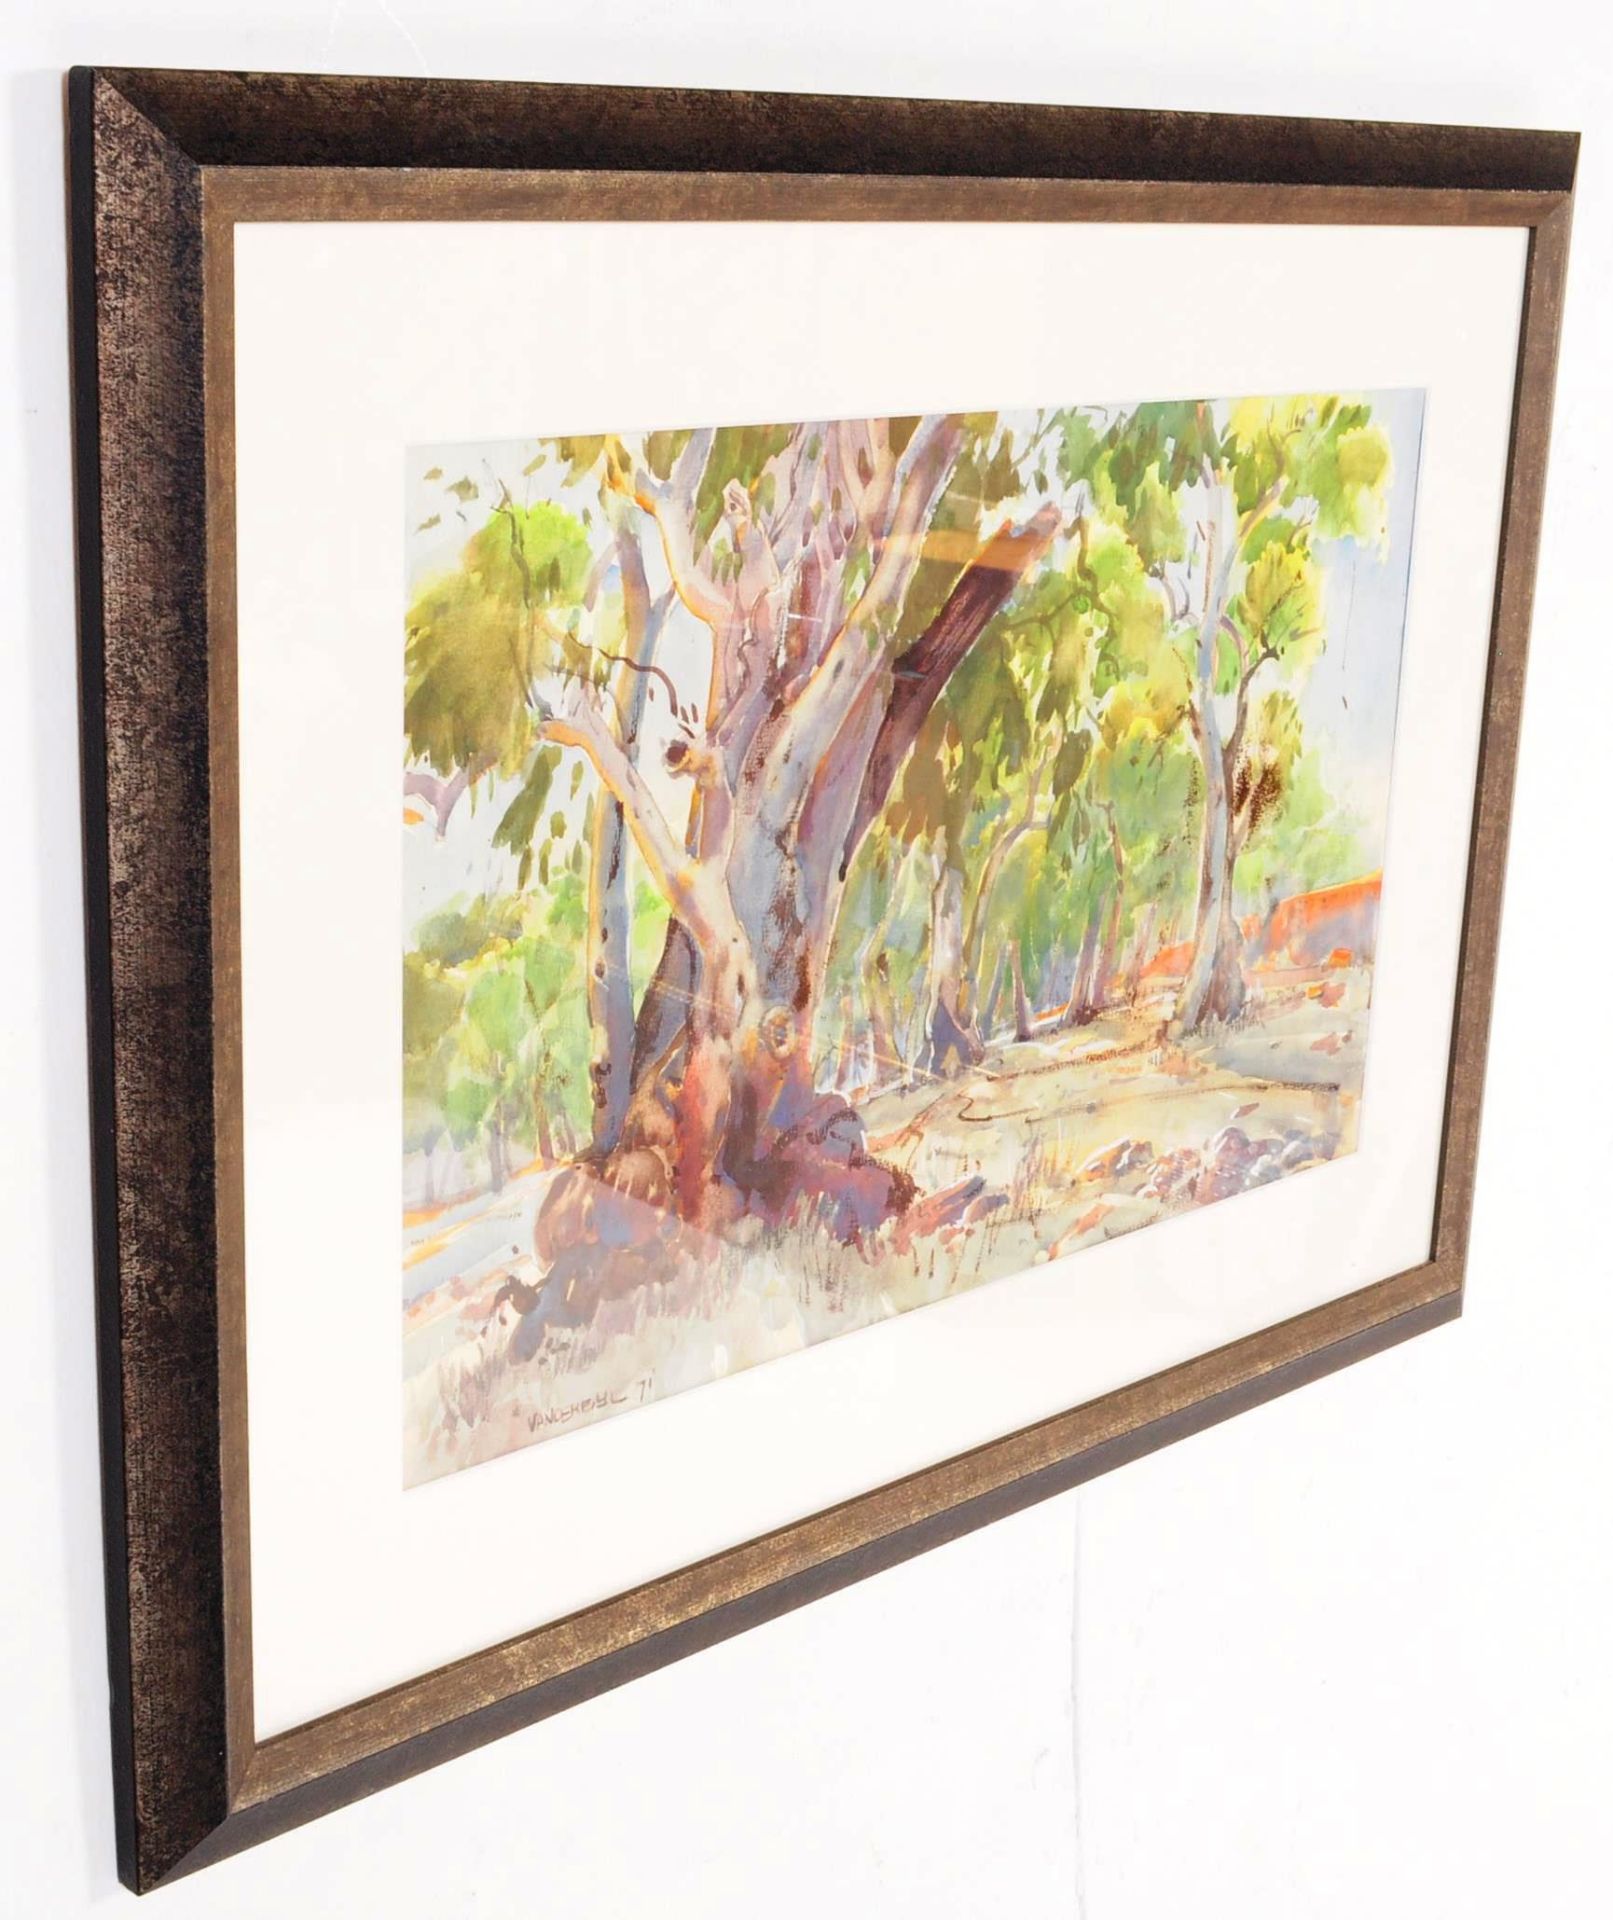 ADRIANUS VANDERBYL - LATE 20TH CENTURY FOREST WATERCOLOUR - Image 4 of 5